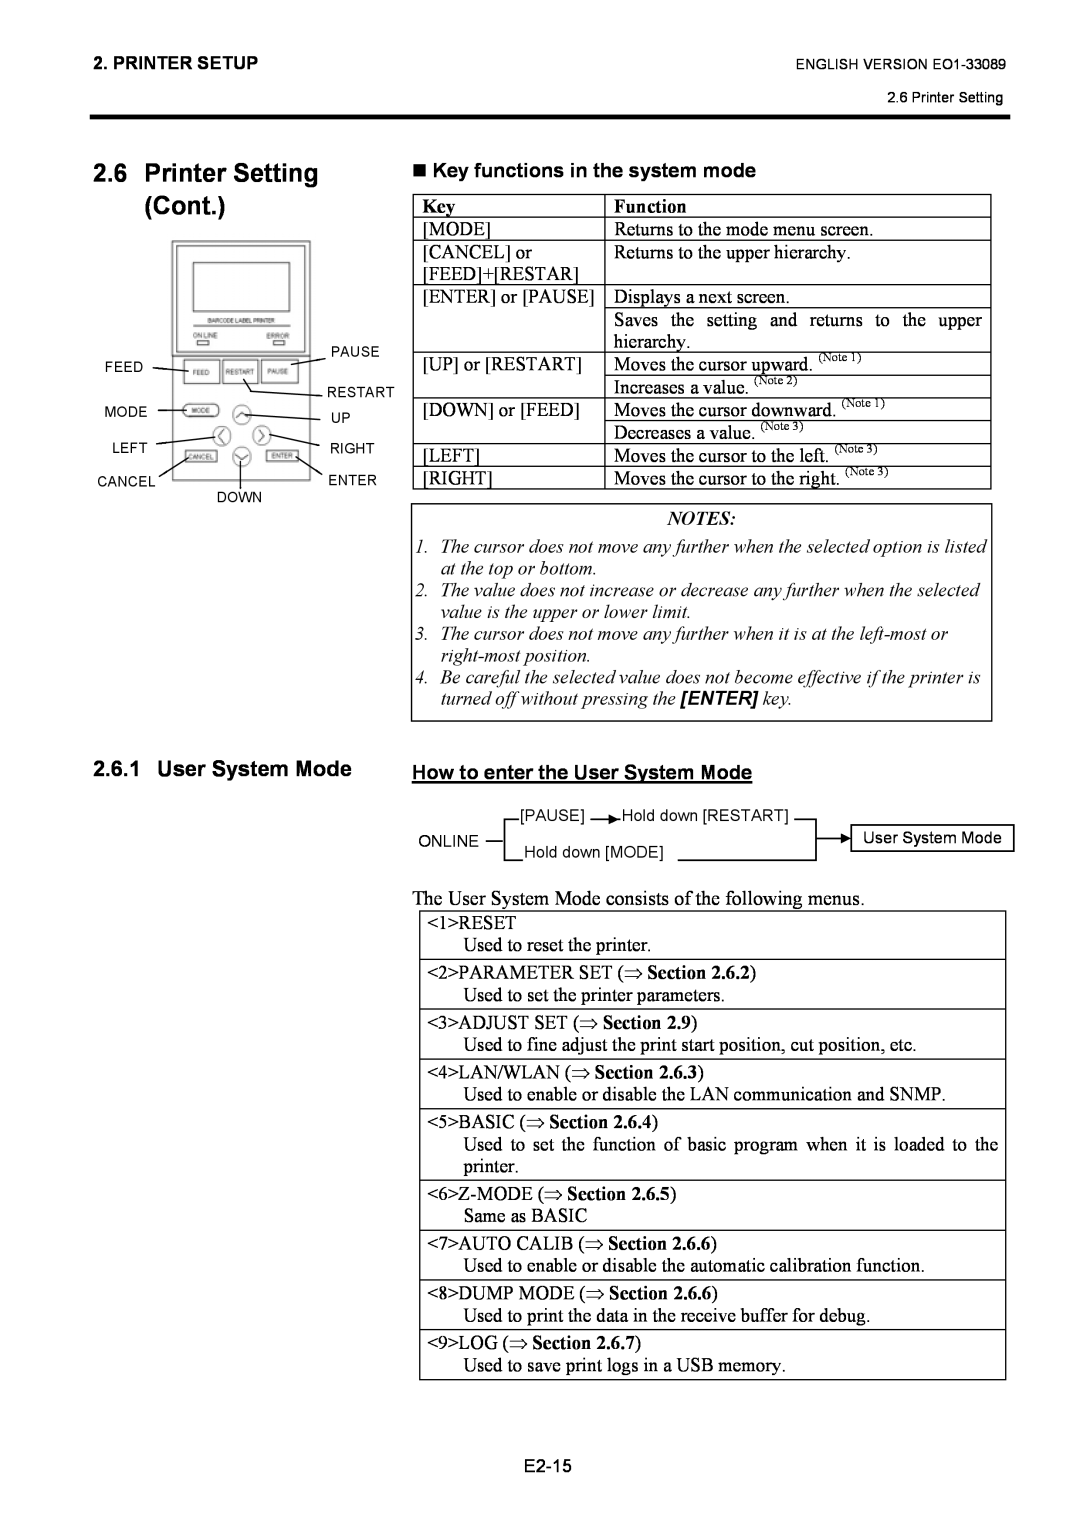 Toshiba B-EX4T1 manual Cont, User System Mode, Printer Setting, Function, 9LOG ⇒ Section 